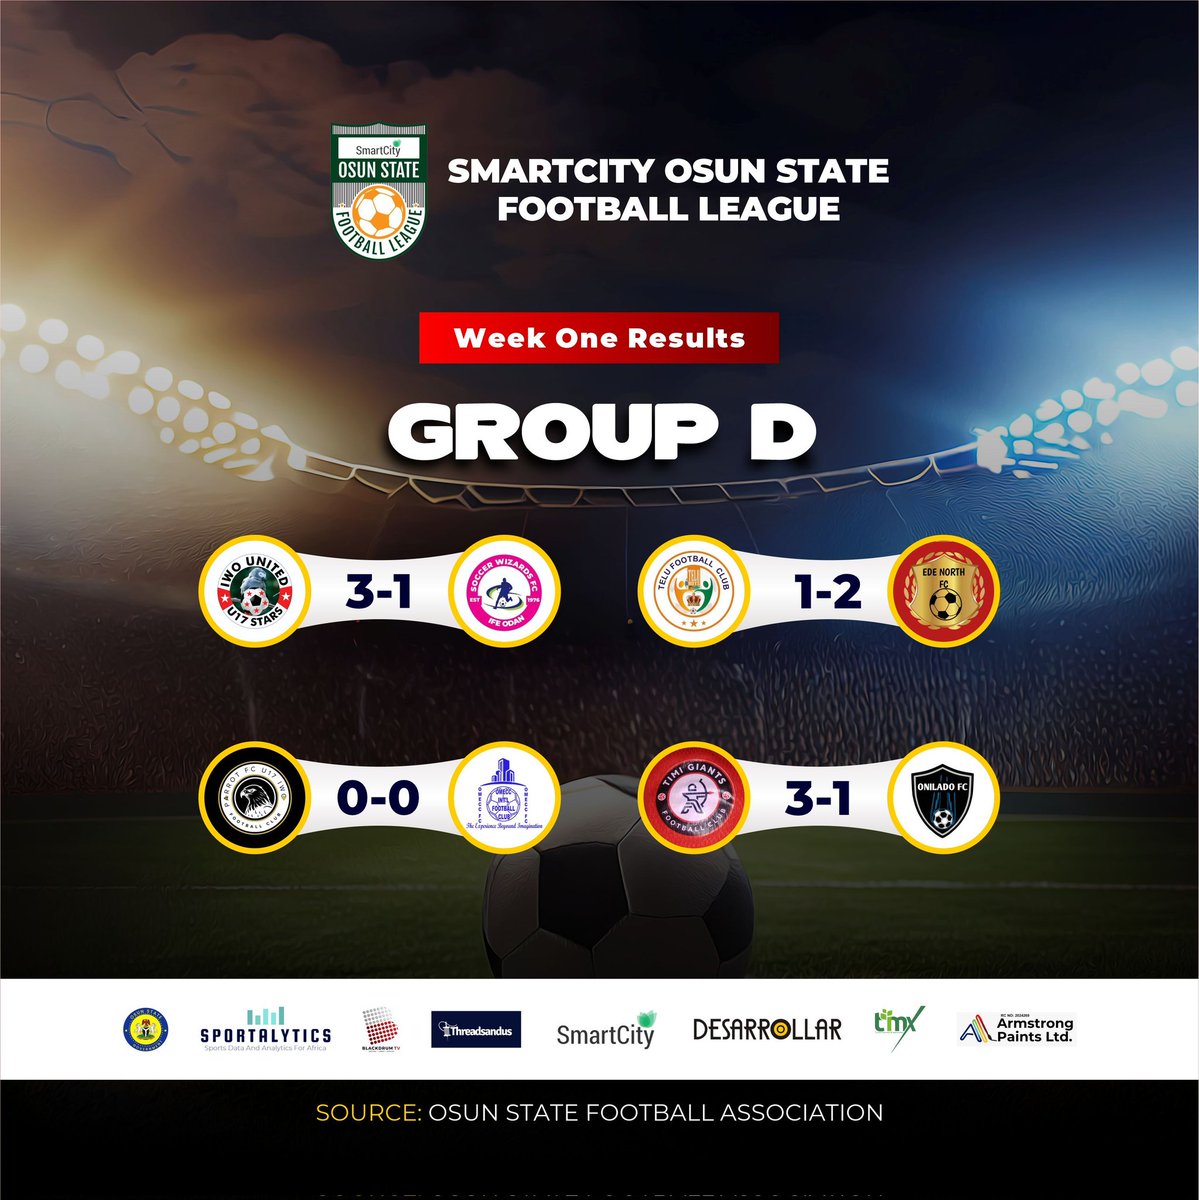 Some great results from Week One Games Of The SmartCity PLC Osun FA League. 

⚡Iwo United started off with a win. 
⚡Ede City boys with a narrow win. 

#SmartCityOsunFALeague. #ArmStrongPaints #BlackDrumTV #SoteroWater #Threadsandus #Sportalytics
#Trumax
#Desarrollar #OsunFA